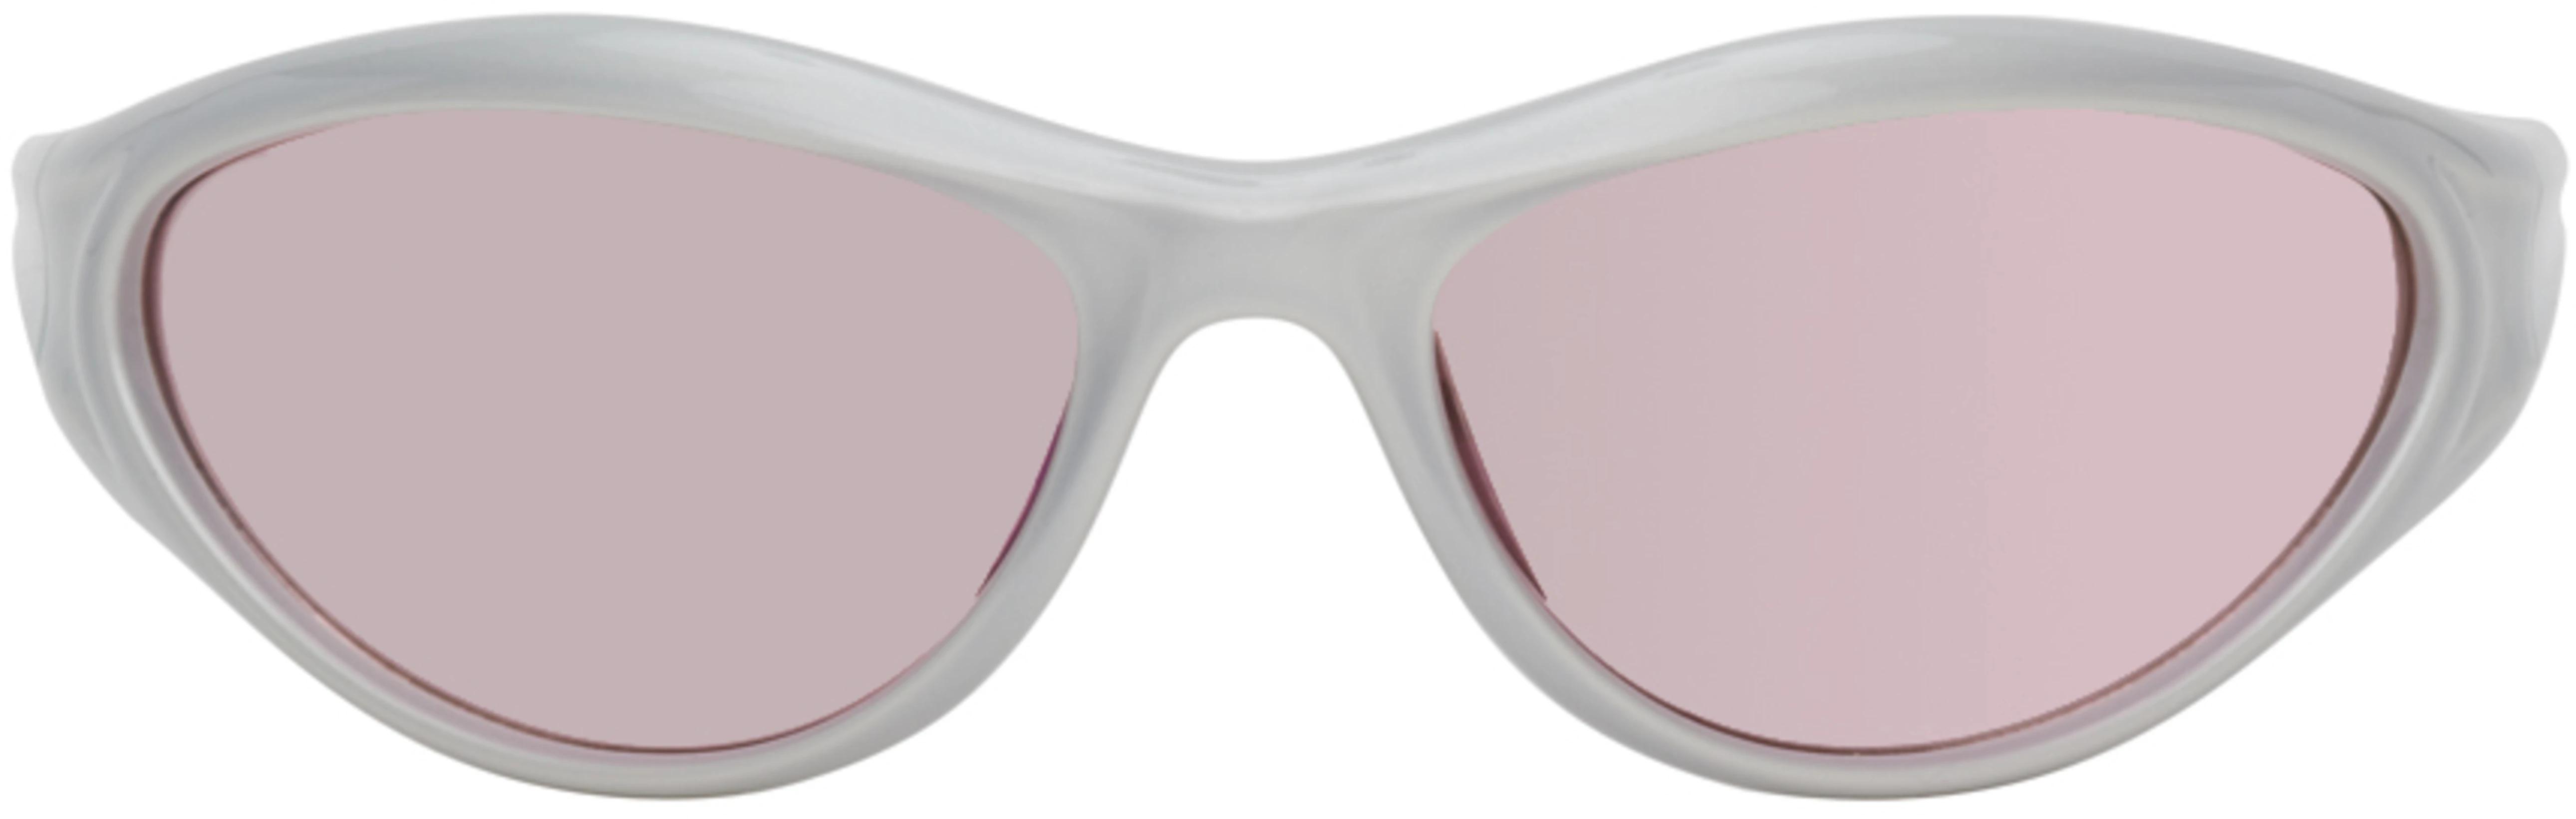 Silver Angel Sunglasses by BONNIE CLYDE